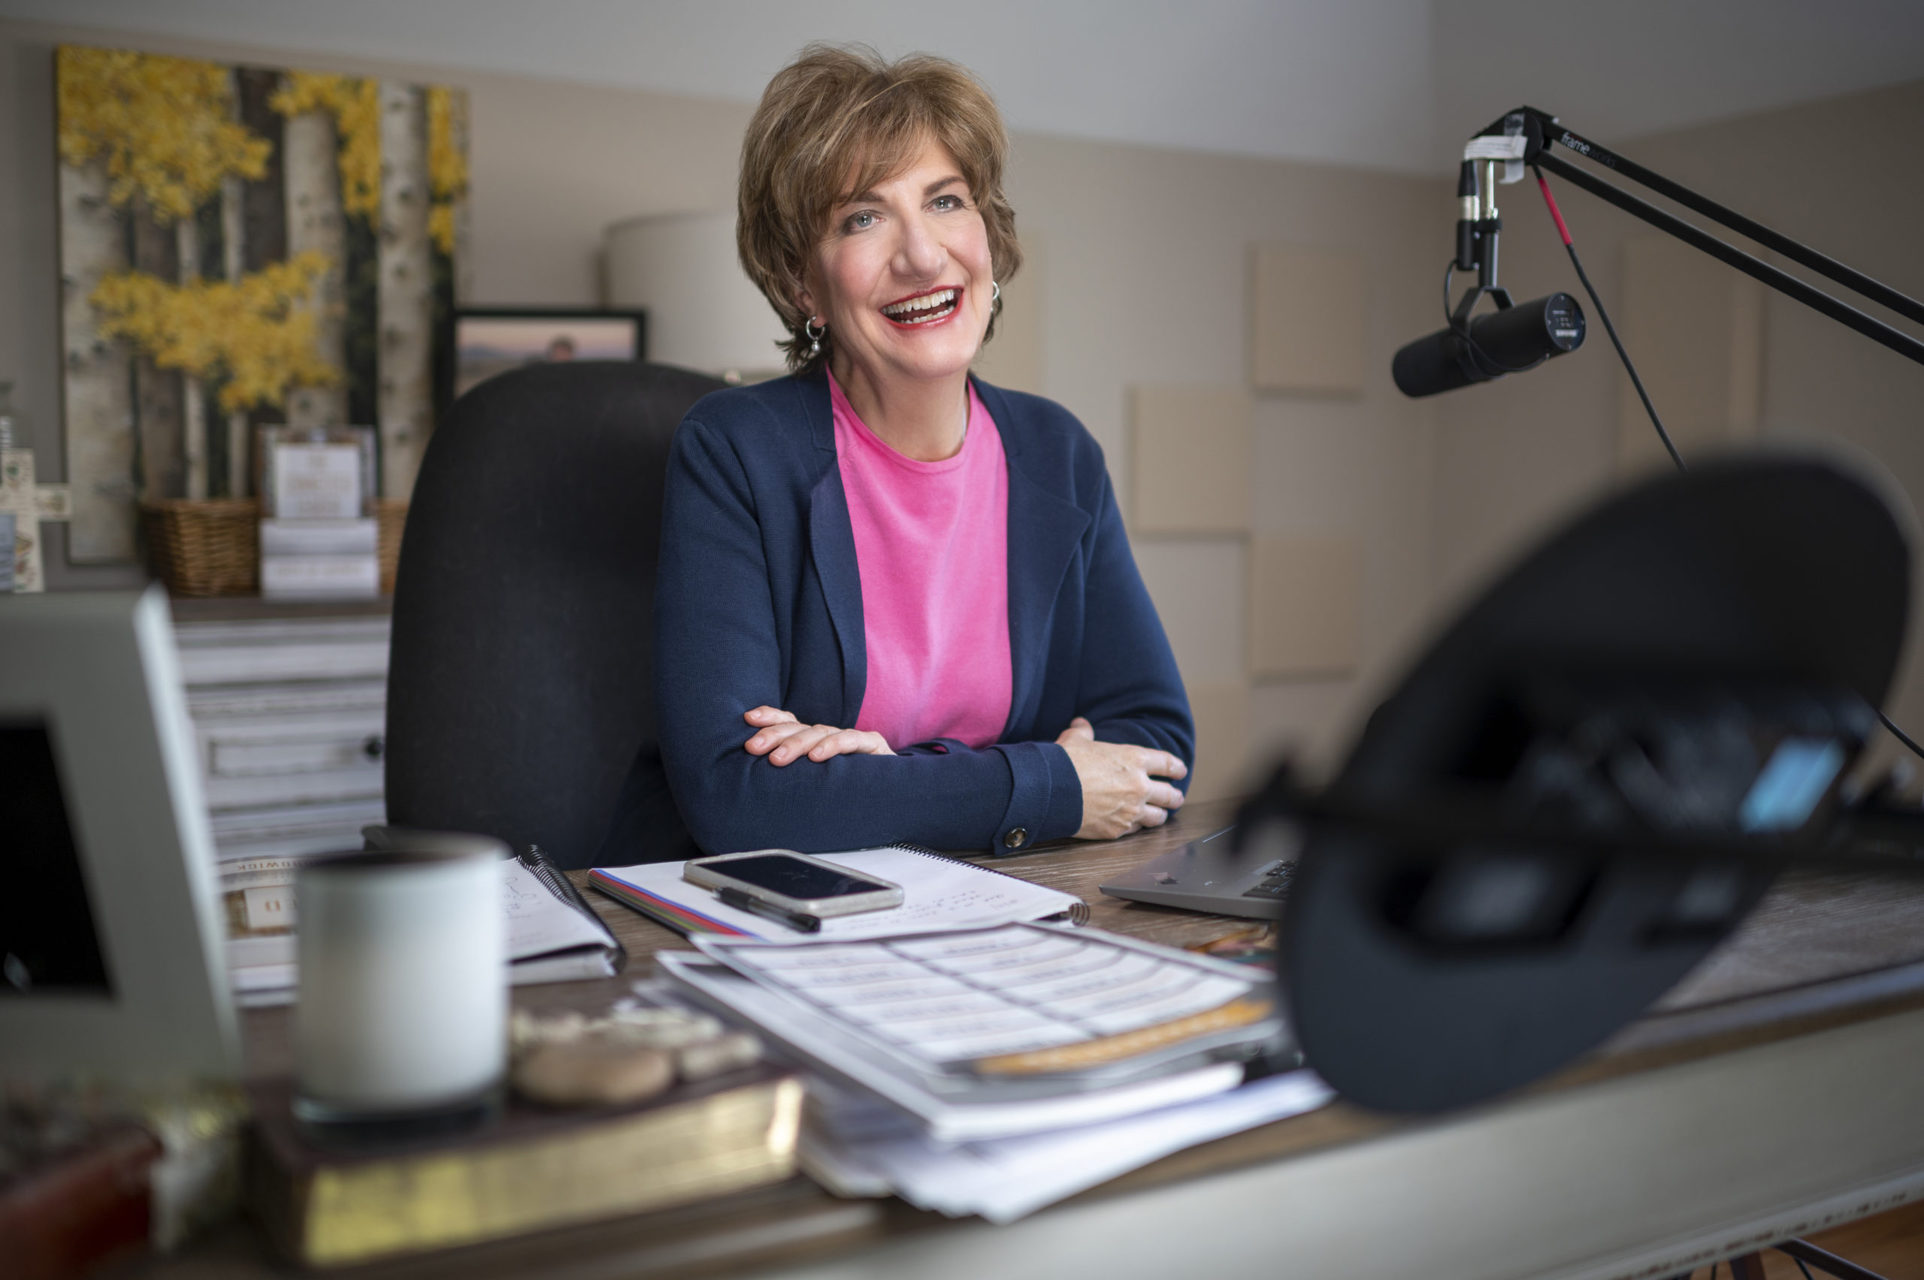 Karen Hardwick sitting at a desk with a microphone smiling